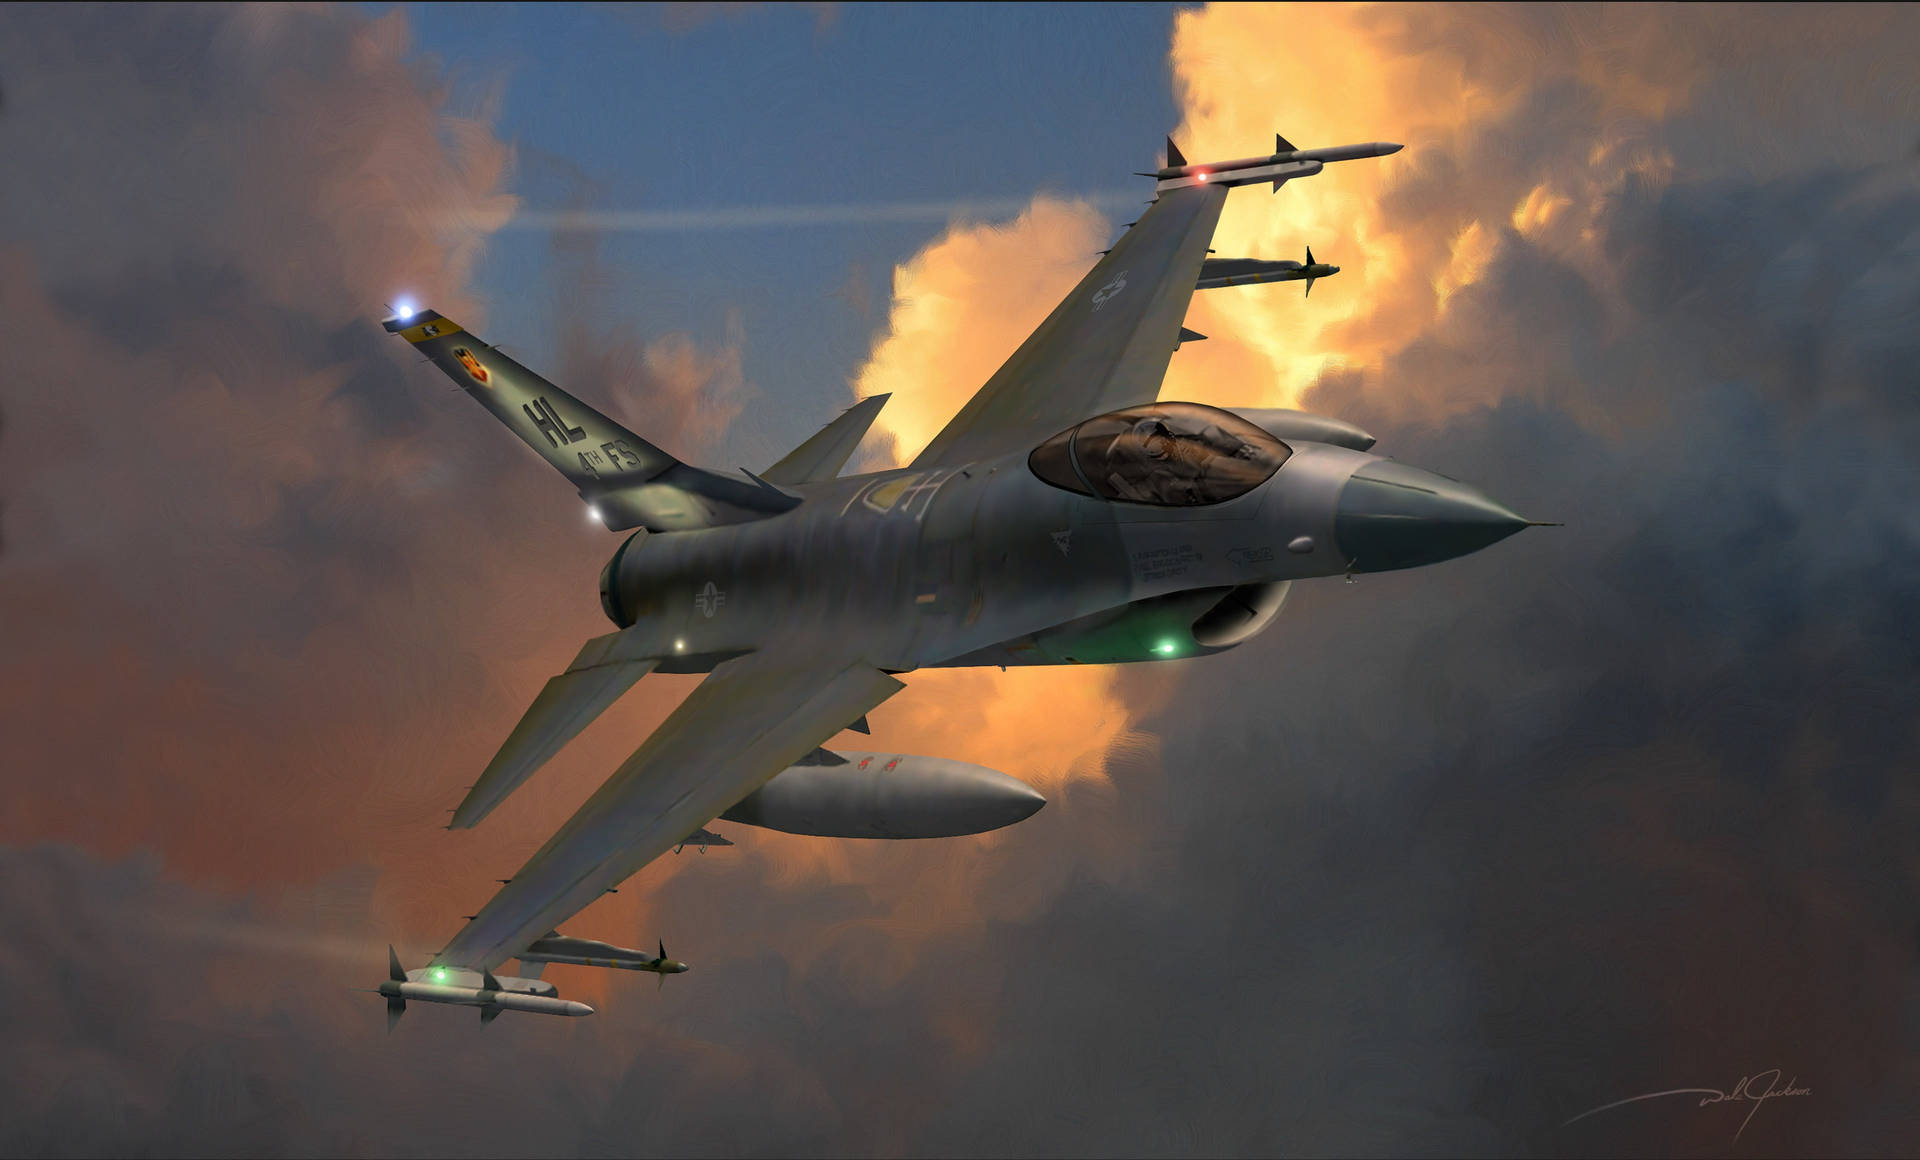 The F-16 Jet Fighter Clouds